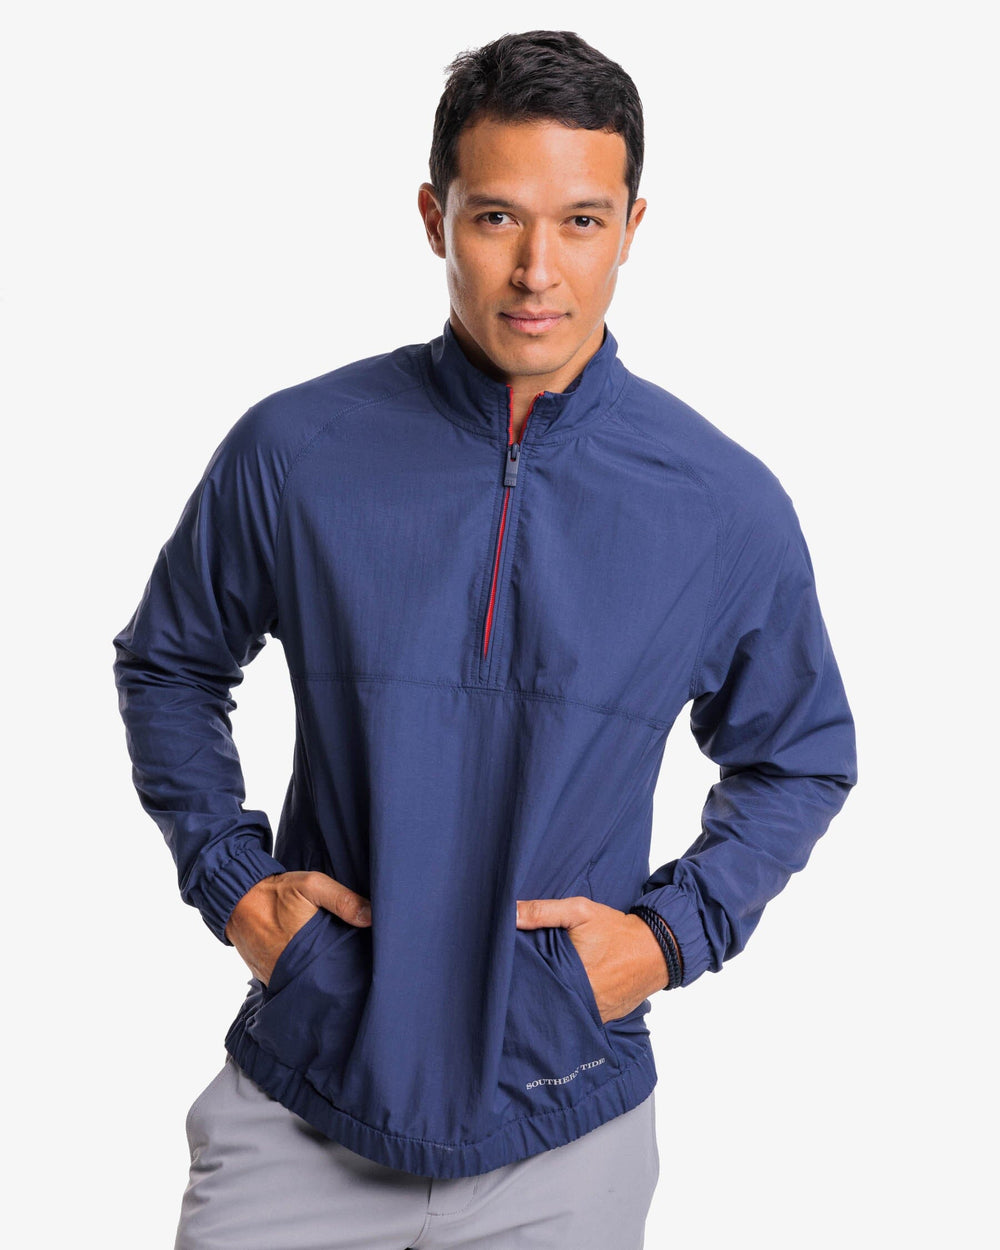 The front view of the Southern Tide Shoreline Performance Pullover by Southern Tide - True Navy